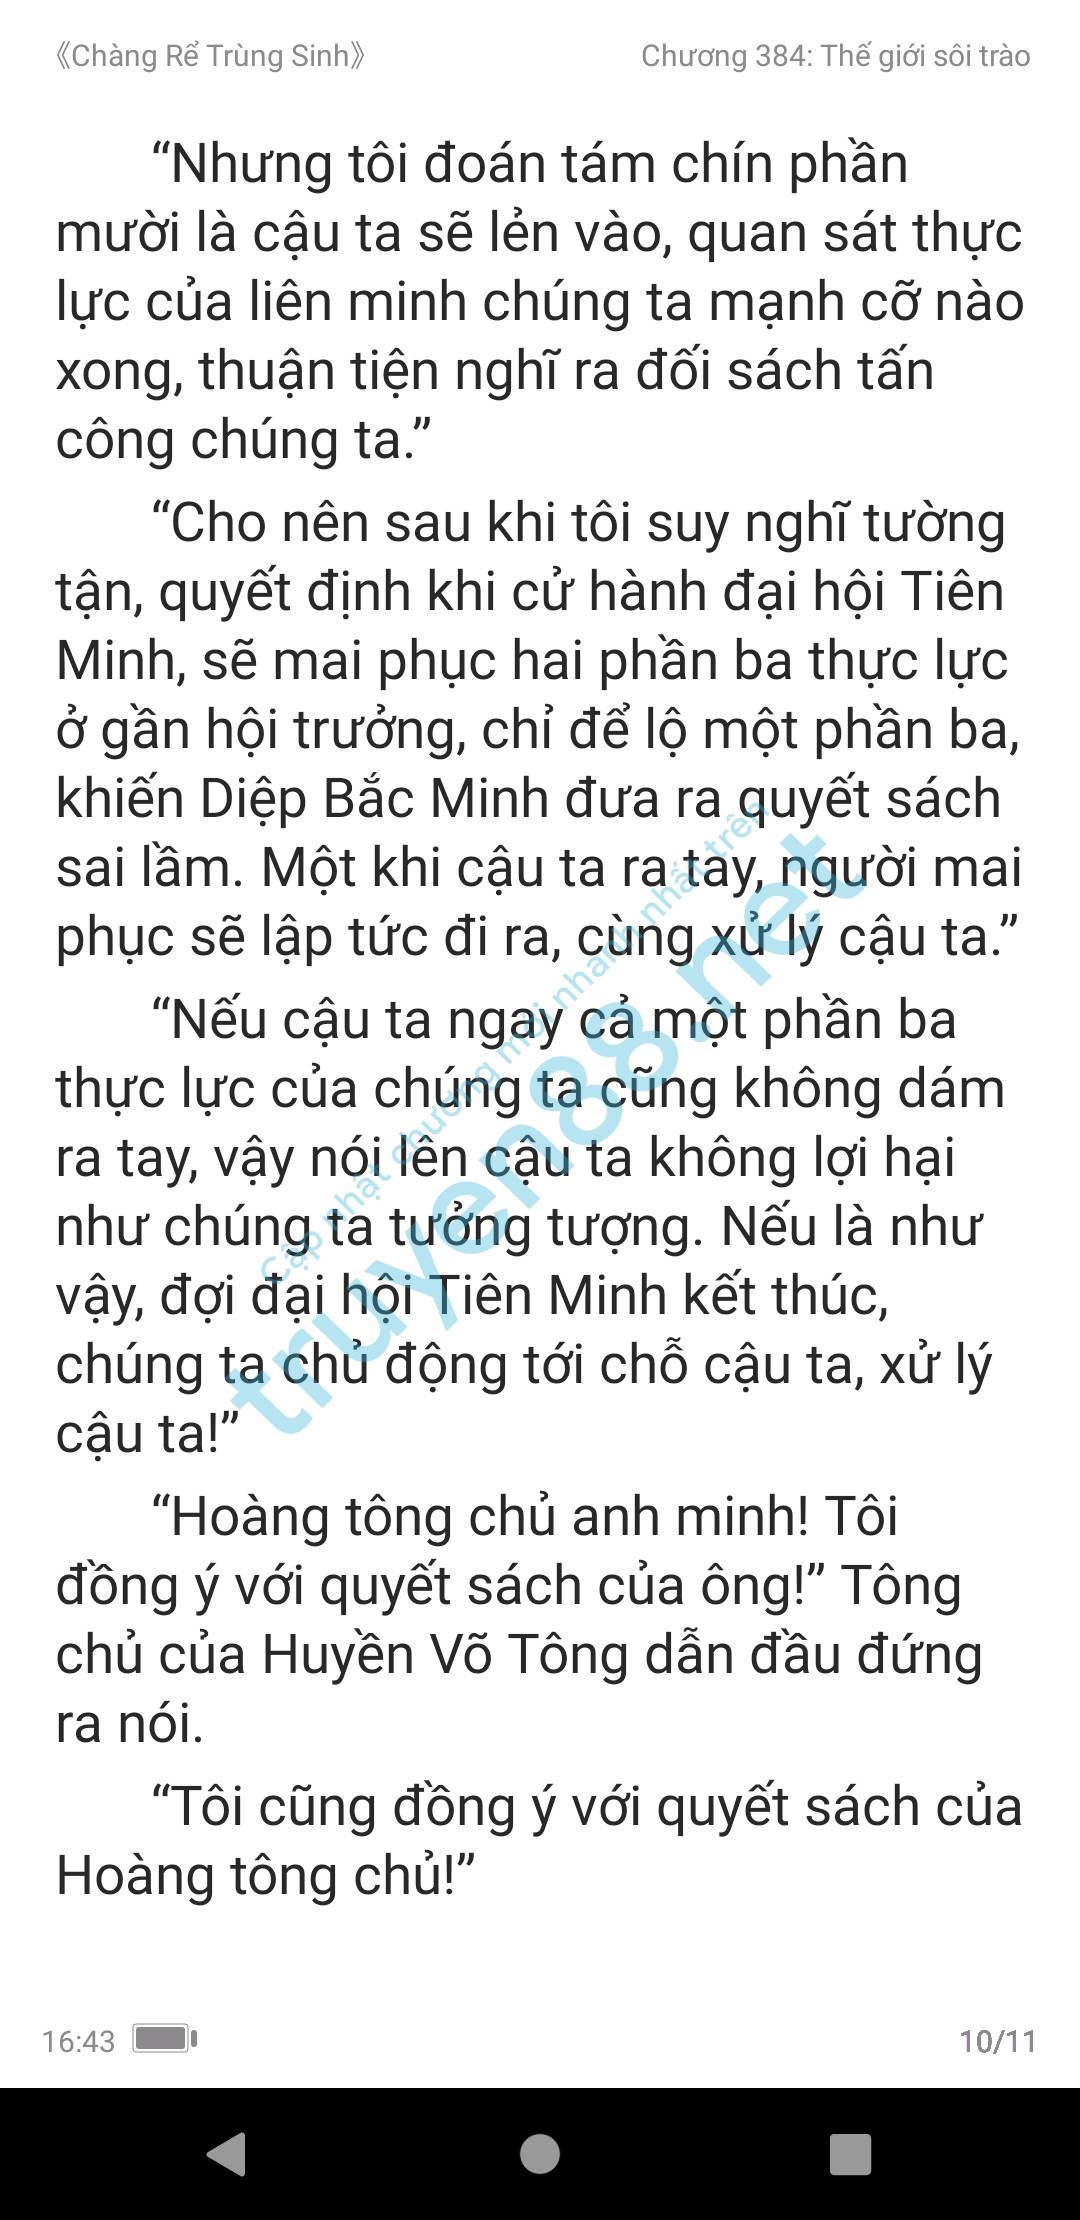 chang-re-trung-sinh-384-0